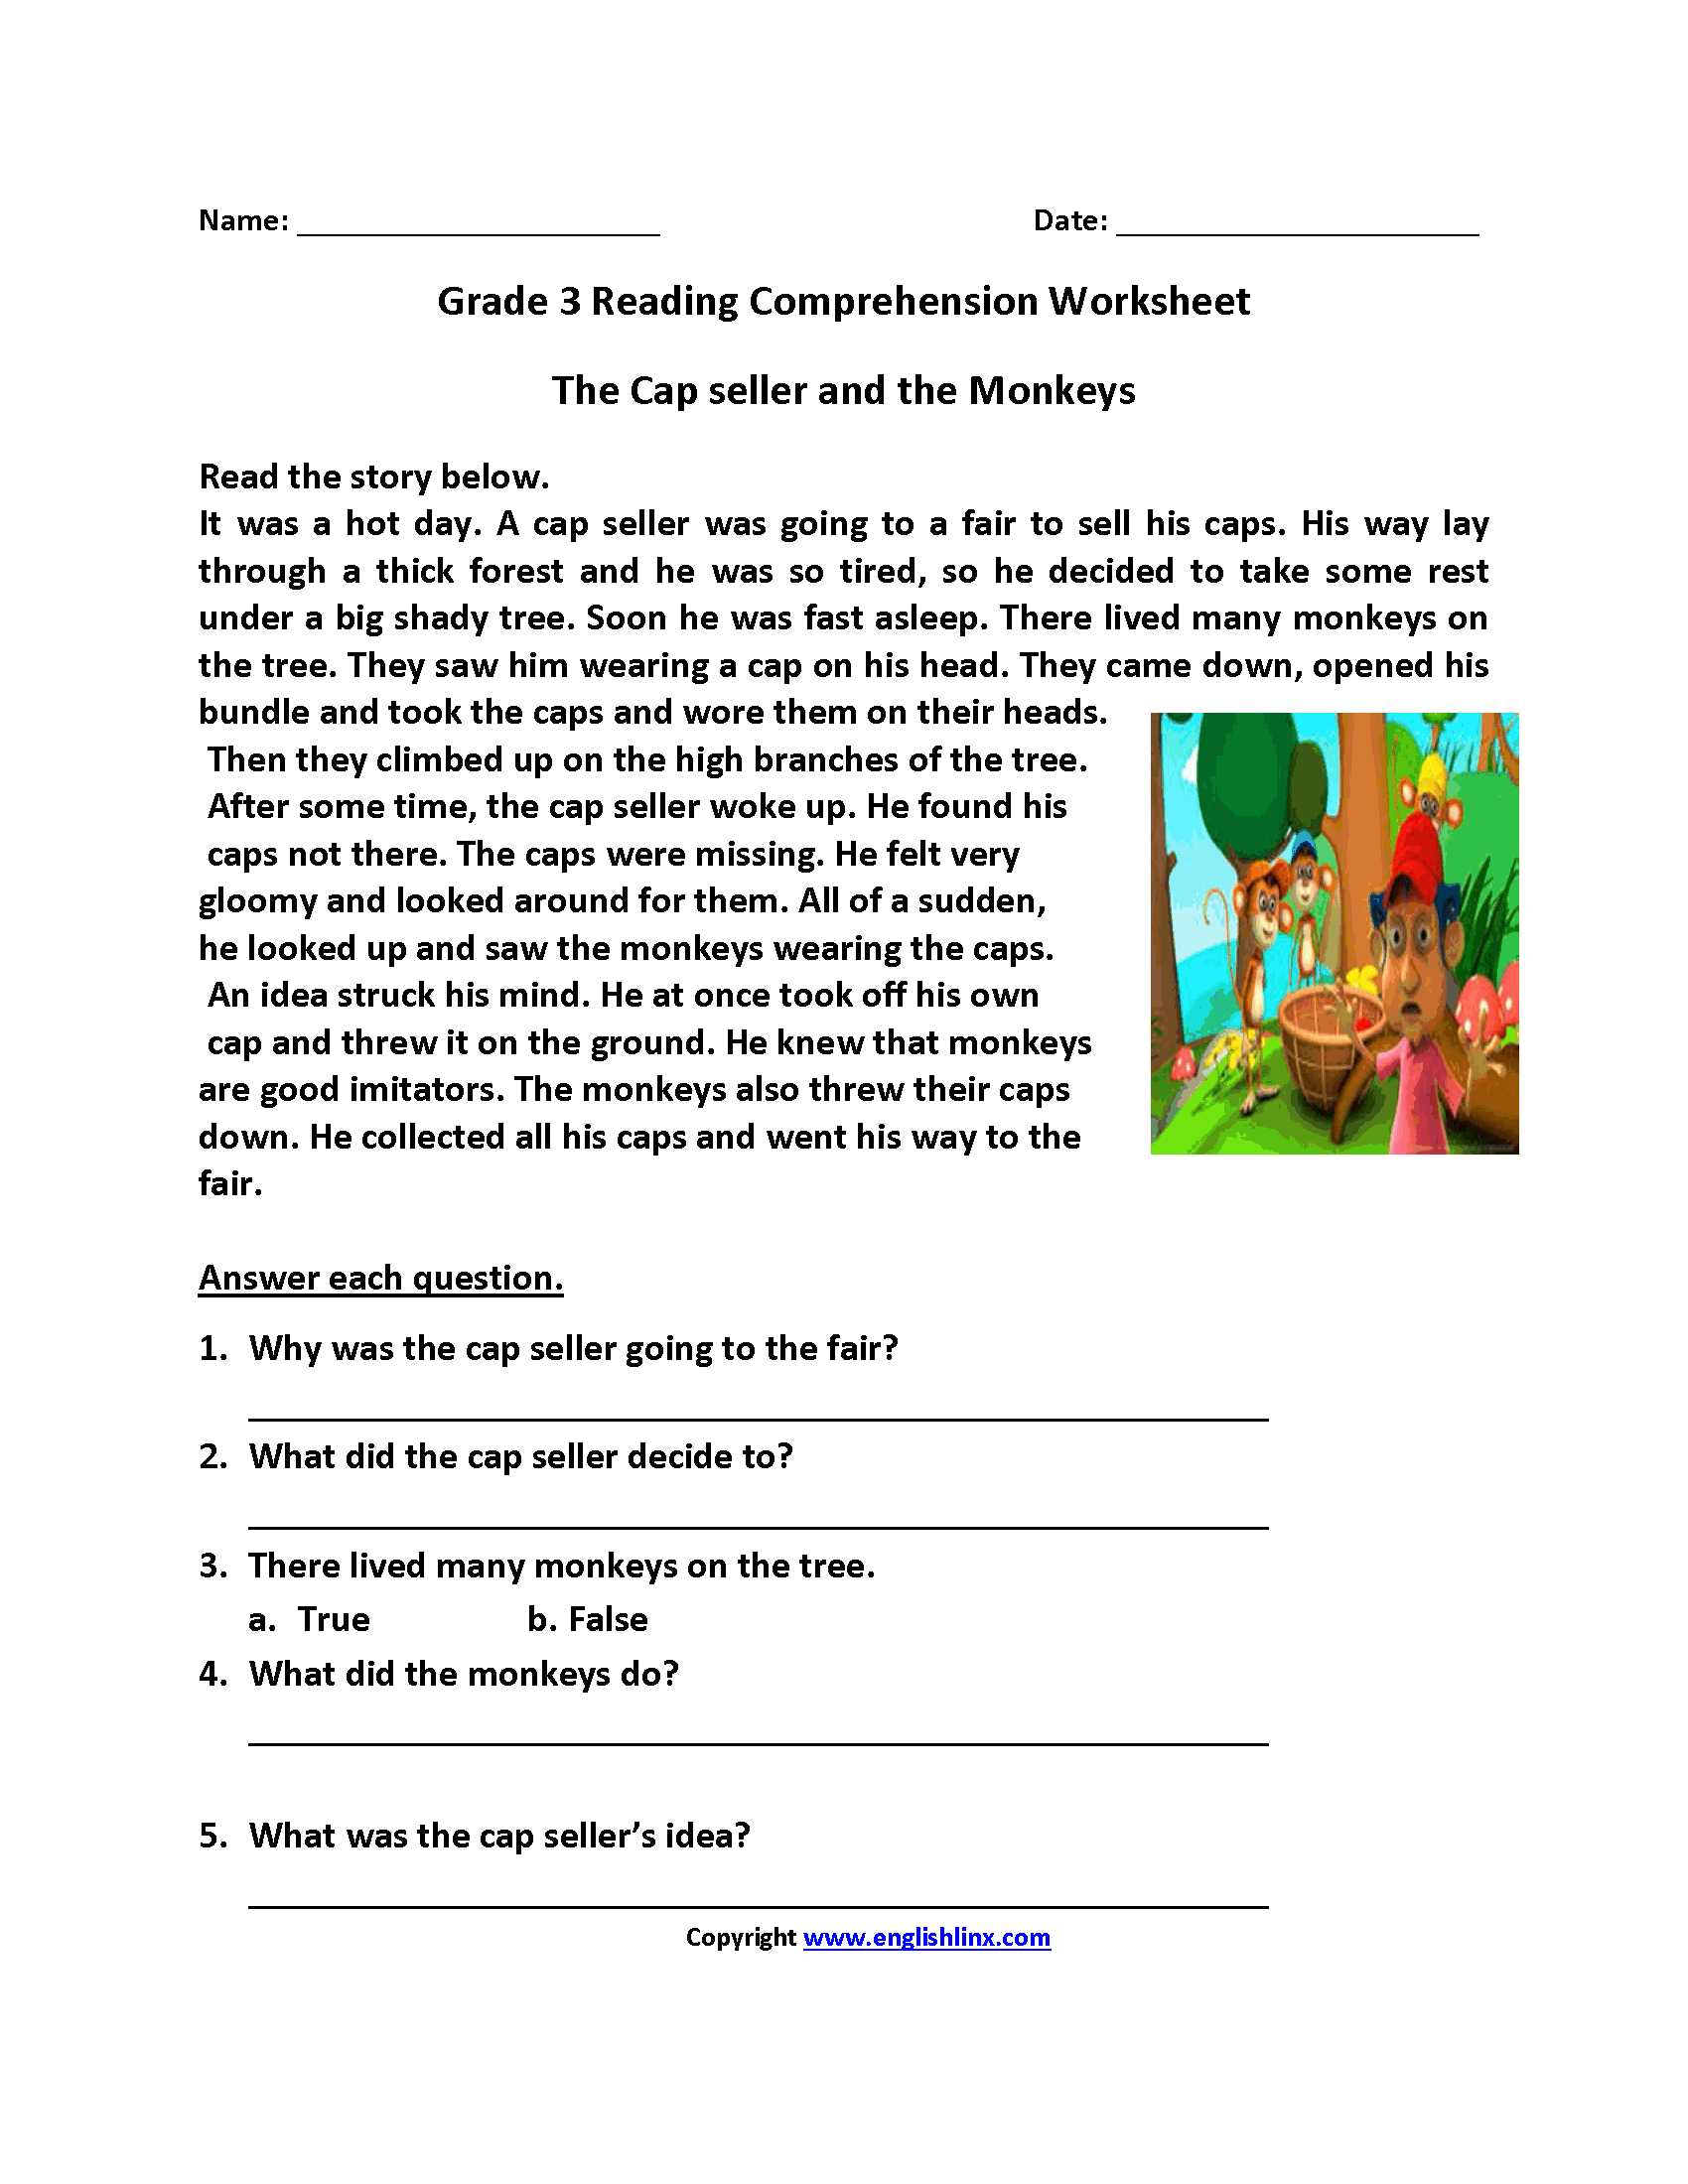 First Grade Reading Comprehension Worksheets as Well as Cap Seller and Monkeys Third Grade Reading Worksheets